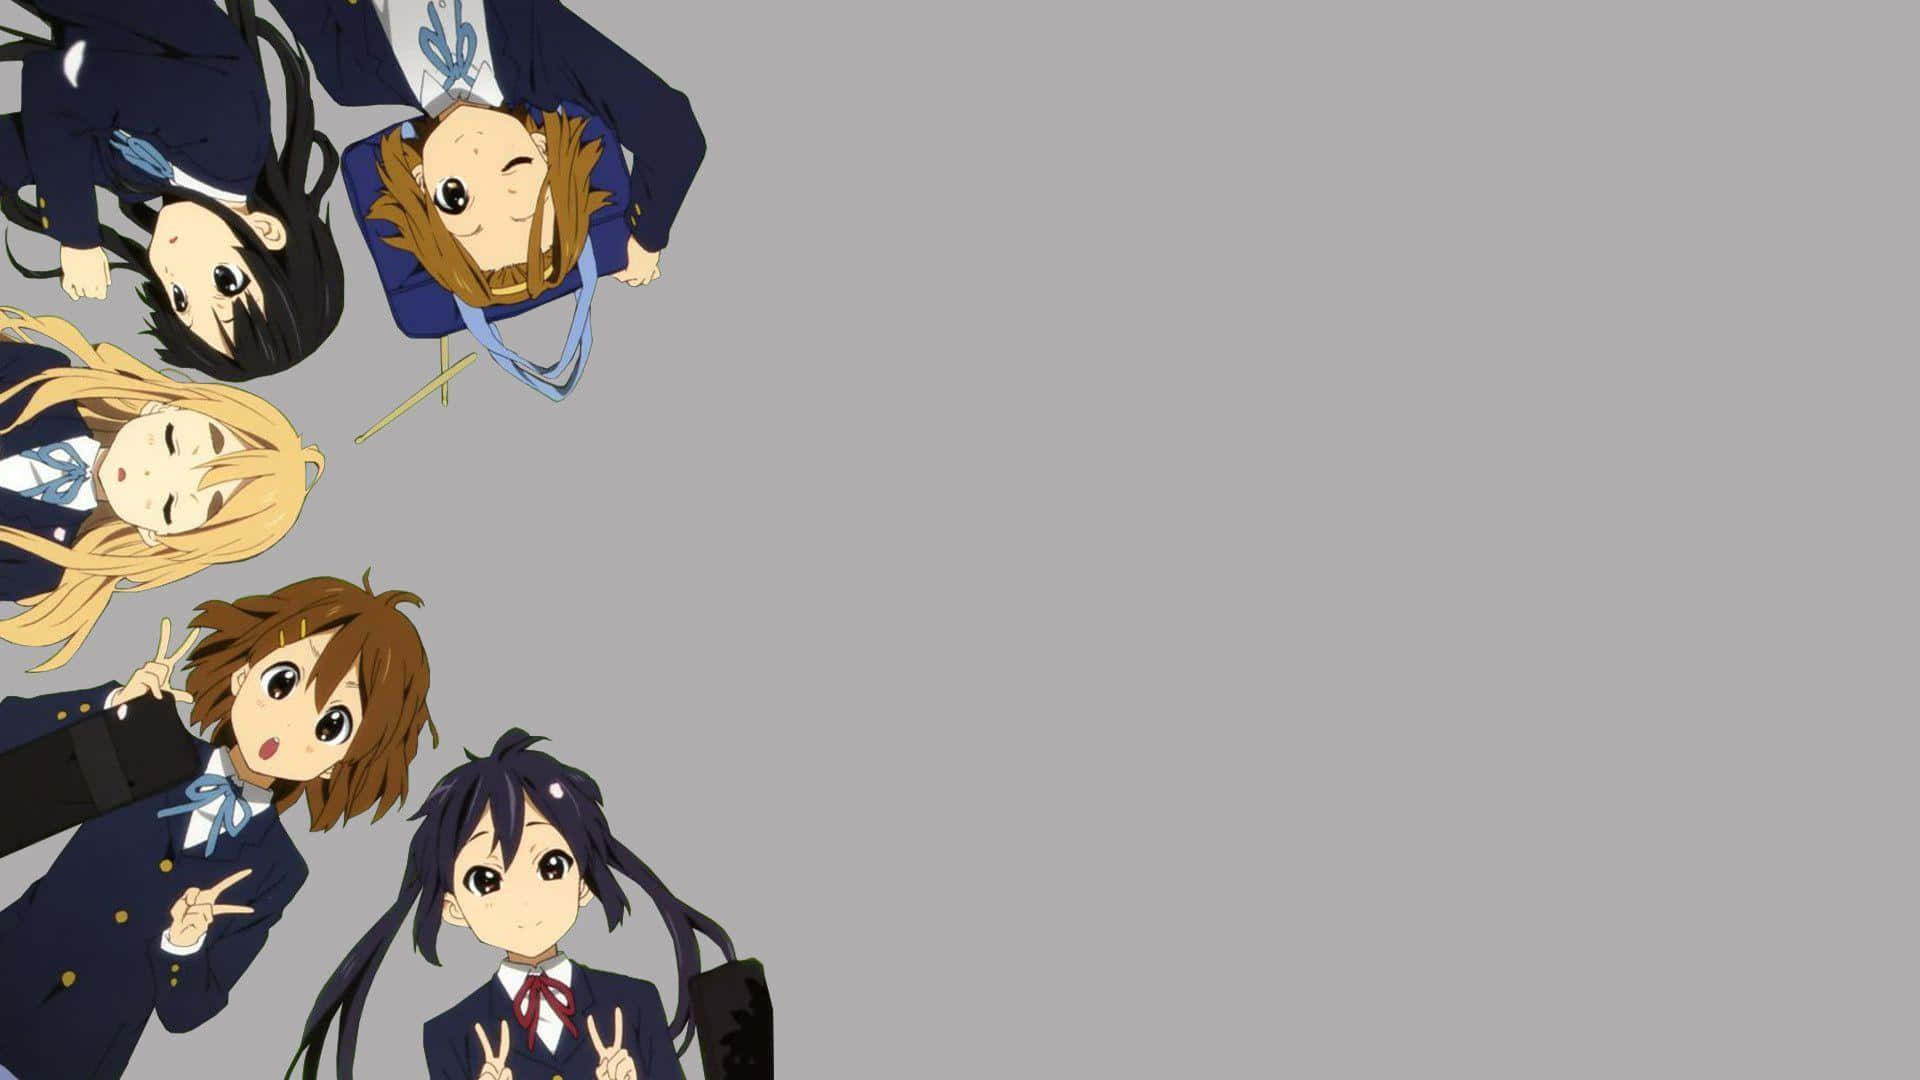 Enjoy a Relaxing Moment with K-on